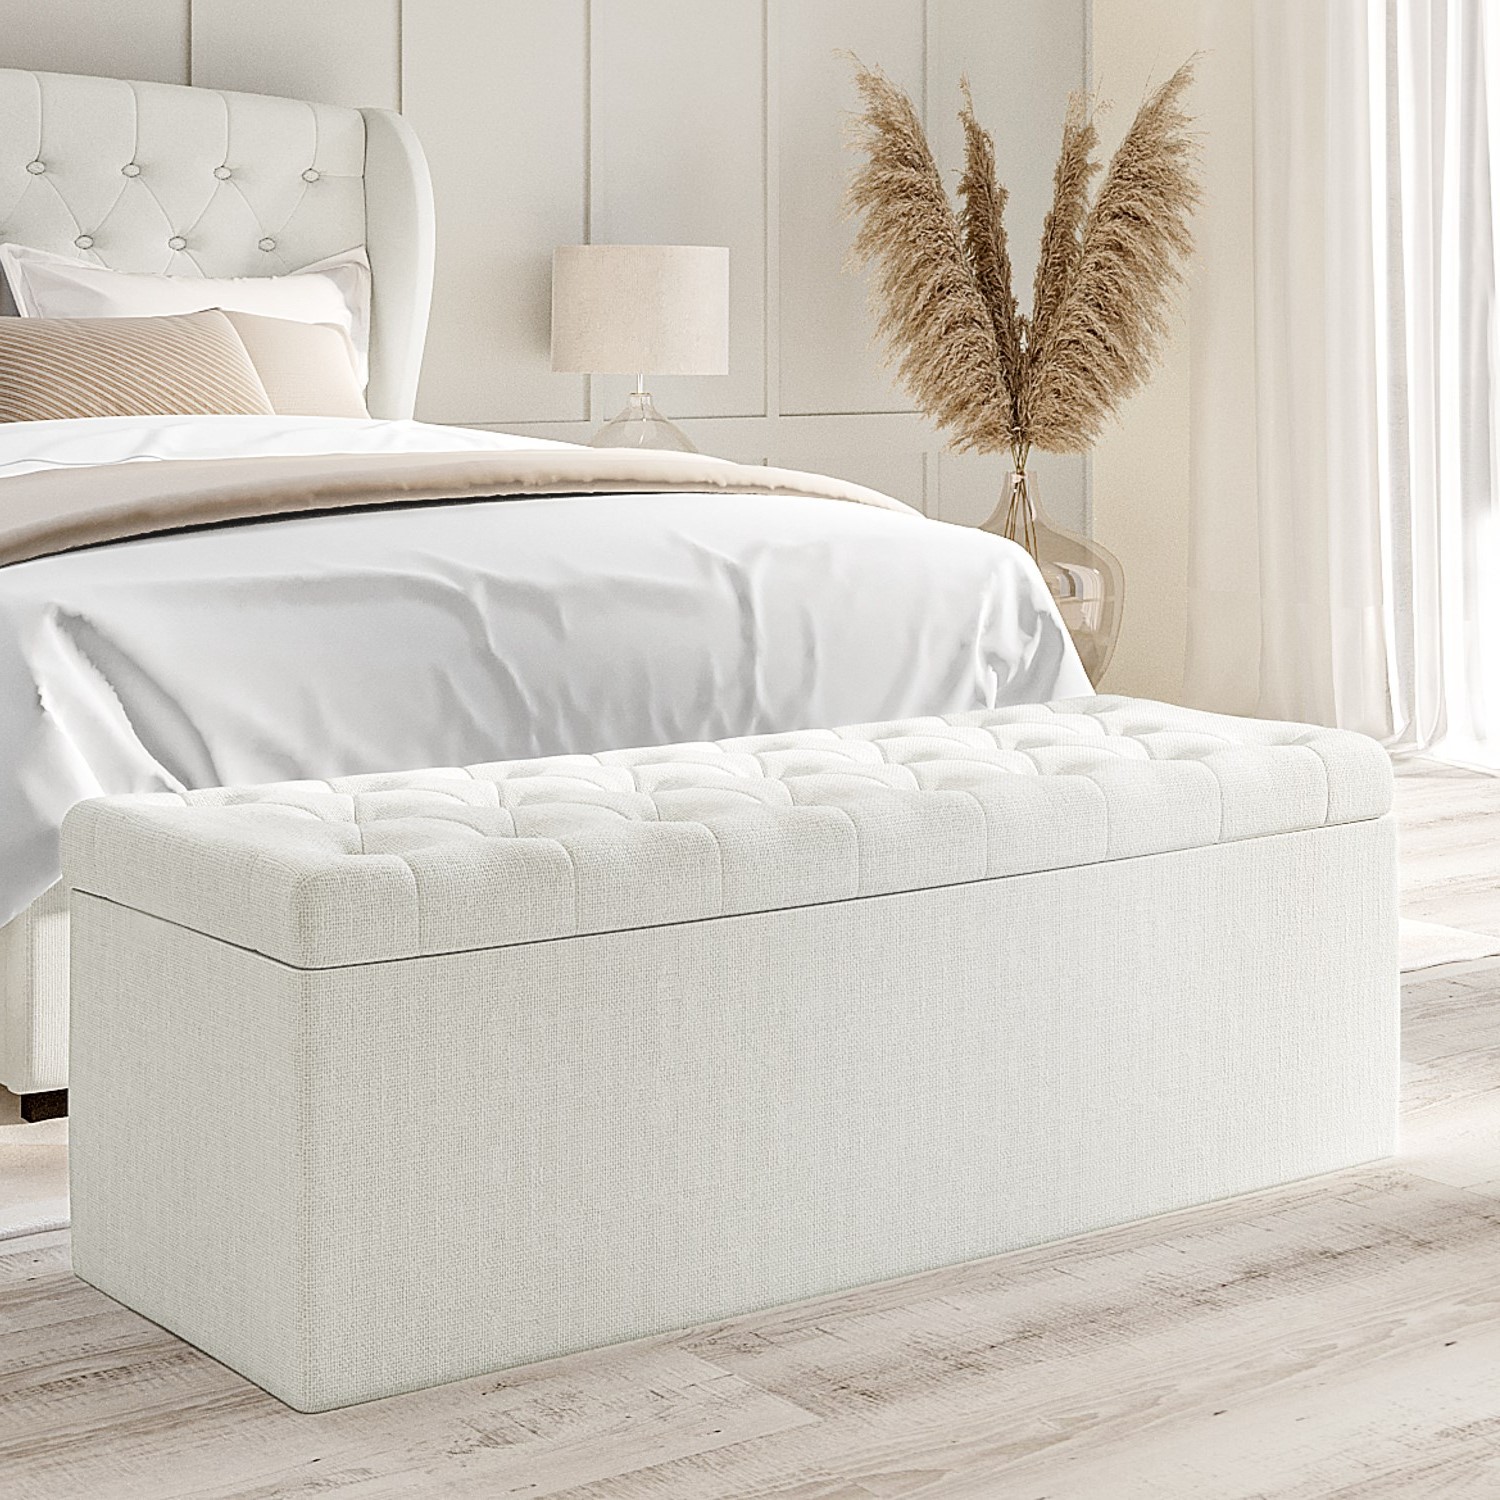 Read more about Cream fabric double ottoman bed with matching blanket box